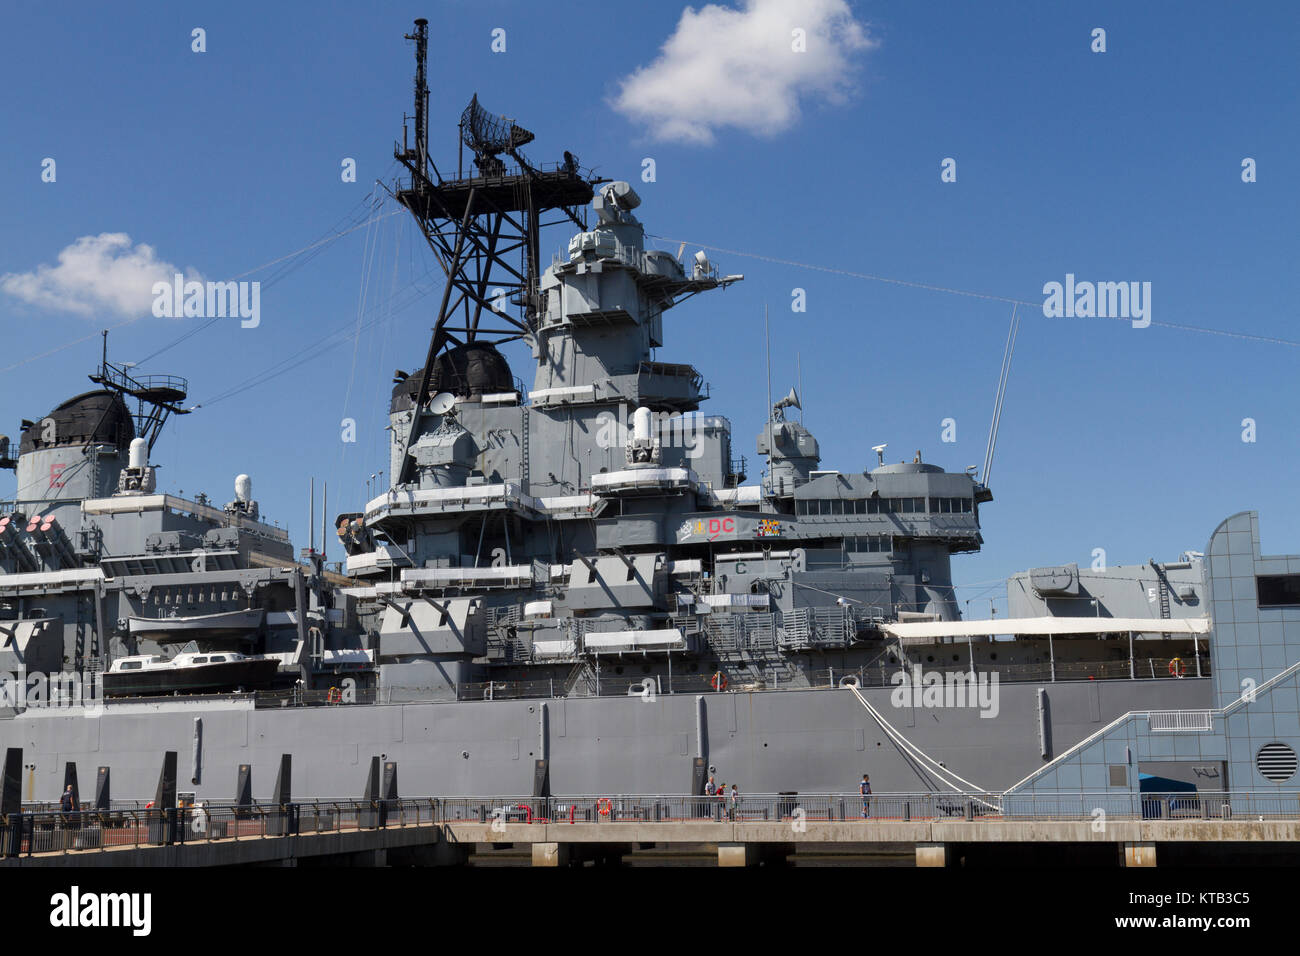 The Battleship New Jersey, moored on the Delaware River, Camden, NJ, United States.   USS New Jersey (BB-62) is an Iowa-class battleship. Stock Photo